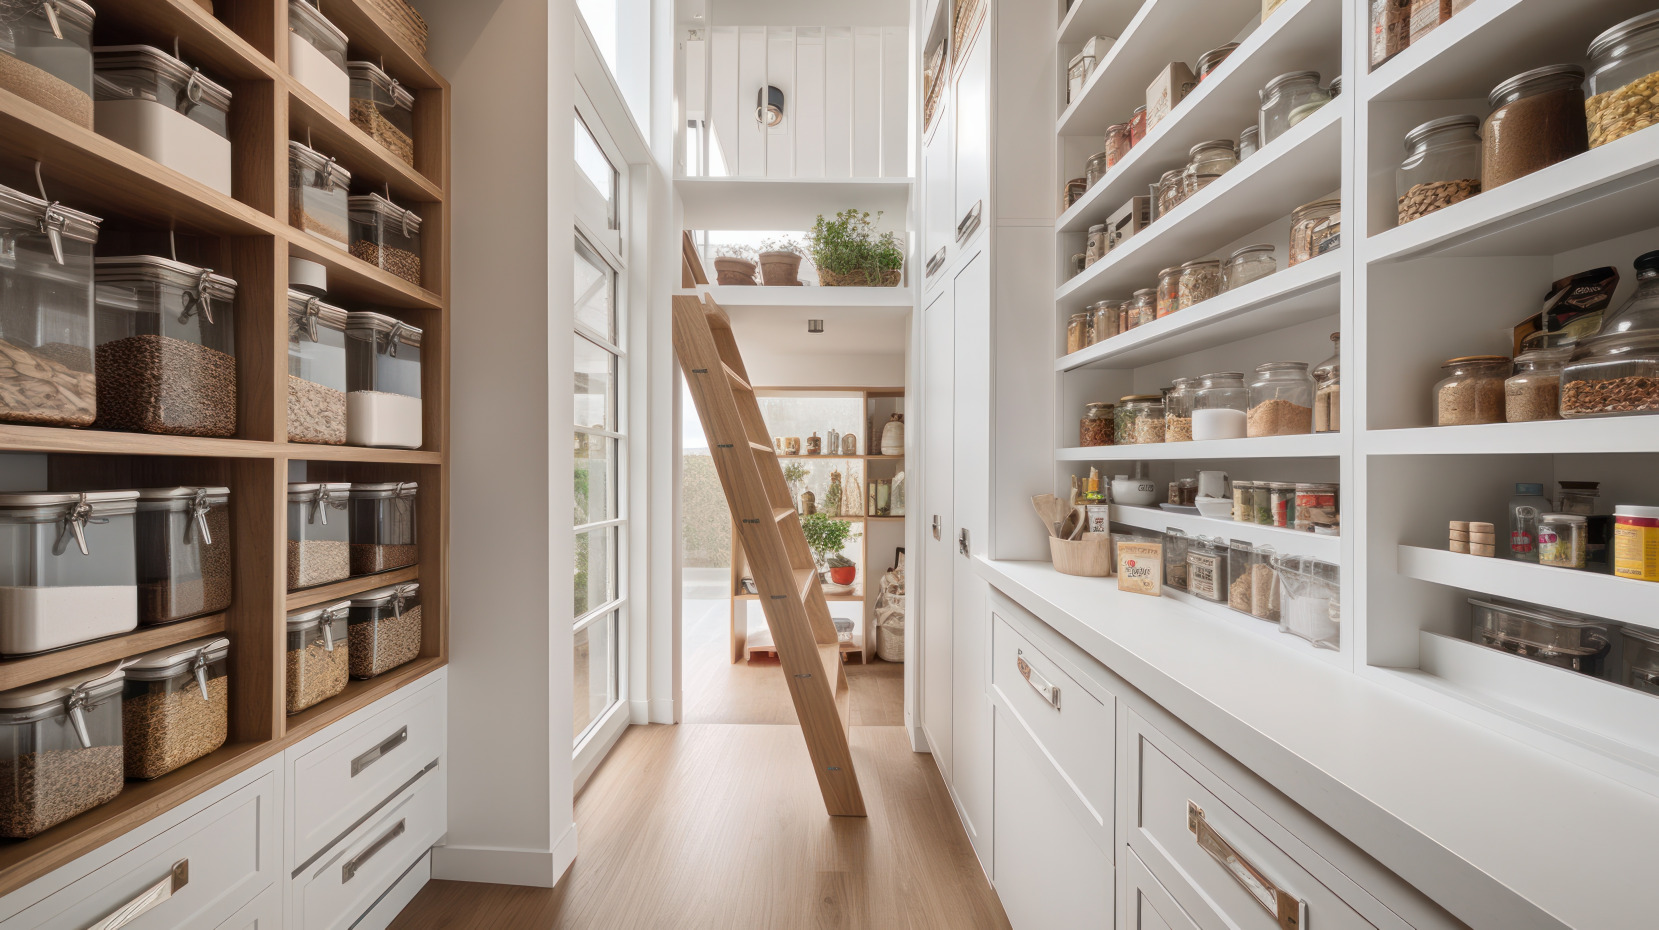 Pantry and storage shelves for food and kitchen items